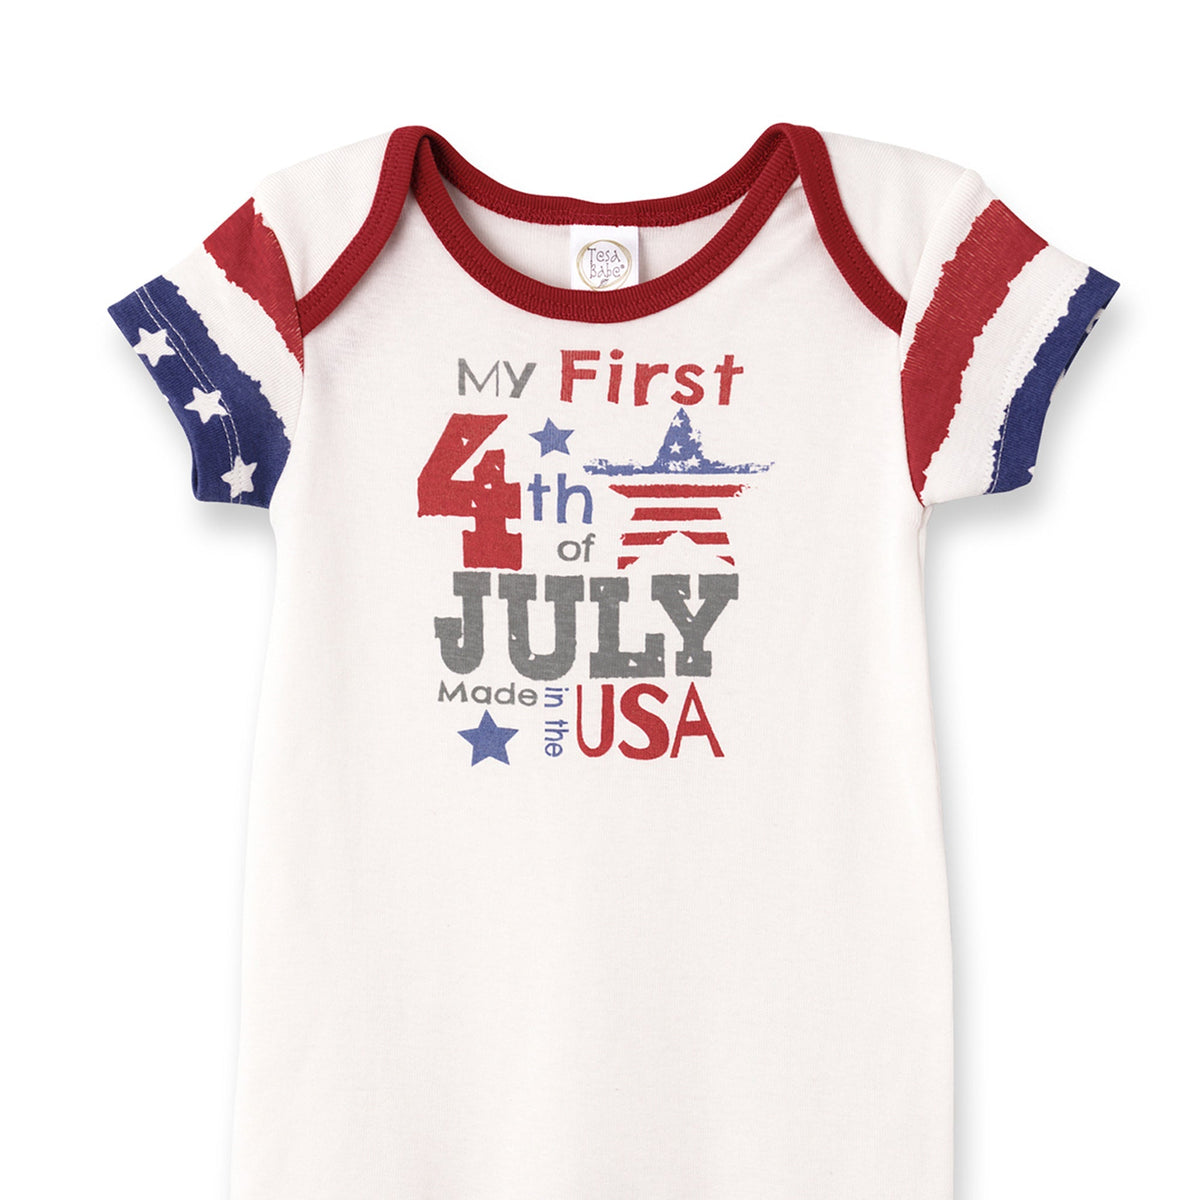 Tesa Babe Baby Boy Clothes My First 4th July Romper